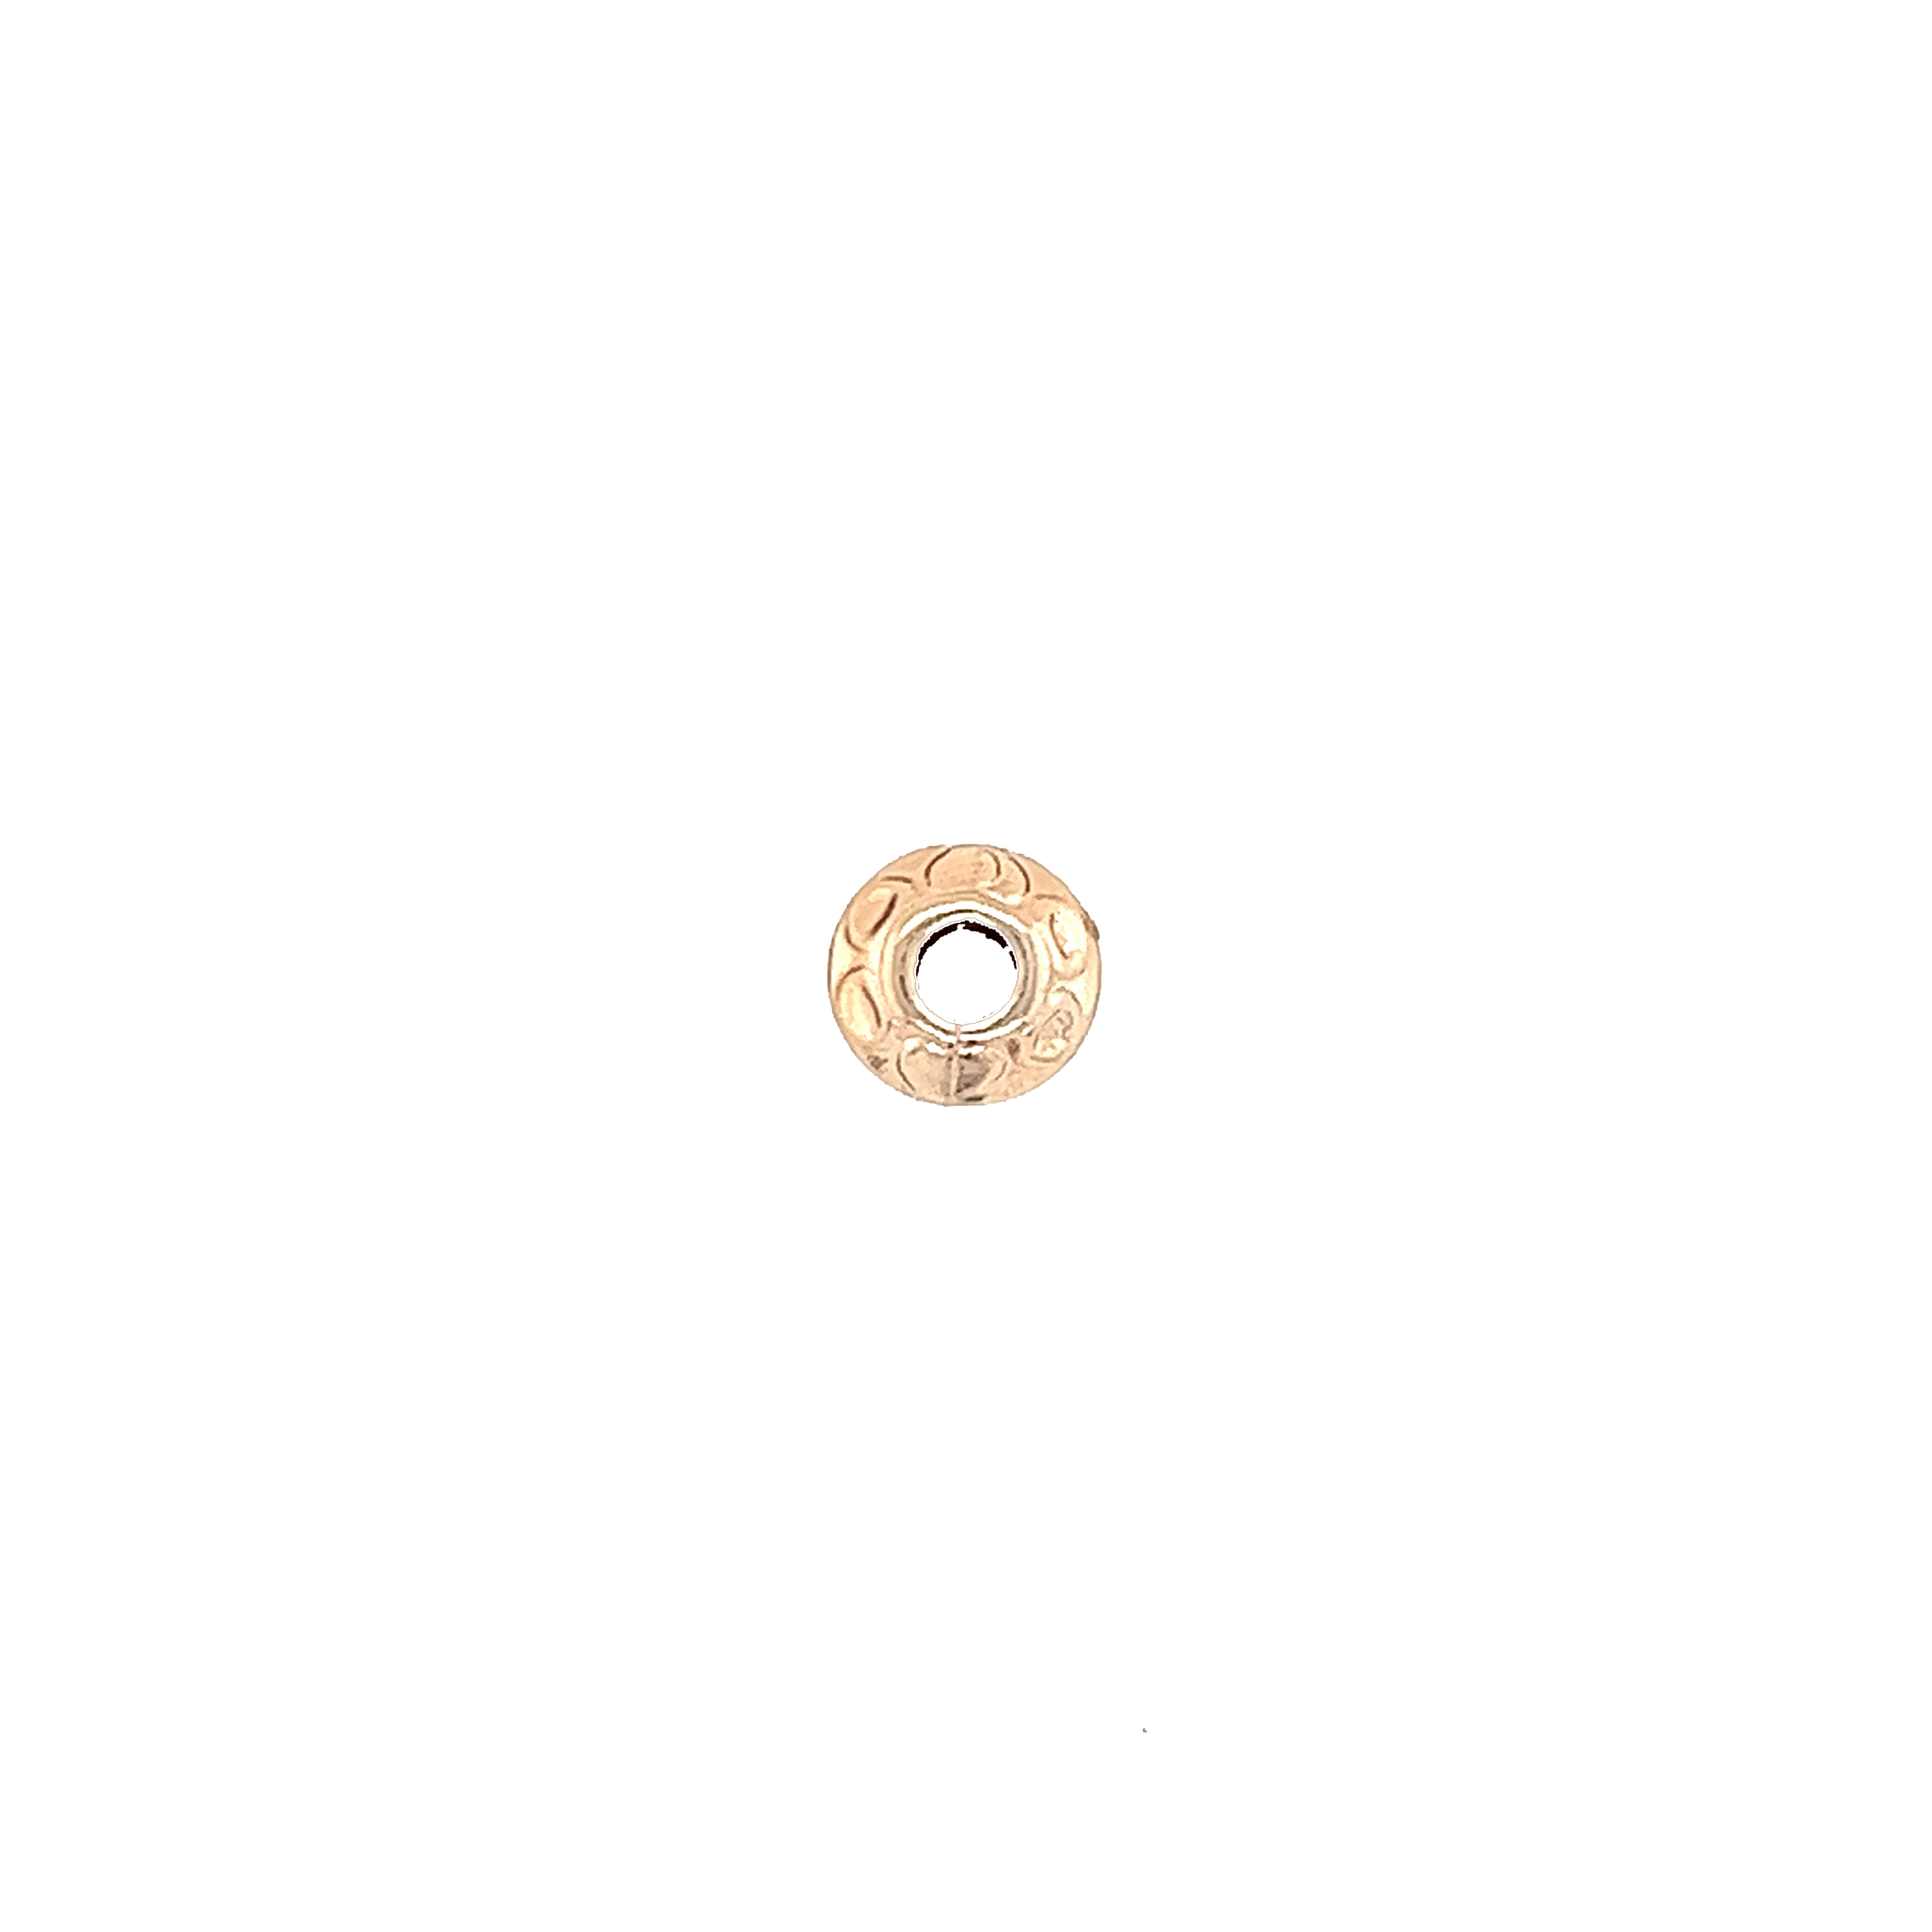 5x7mm Drum Spacer  - Rose Gold Plated